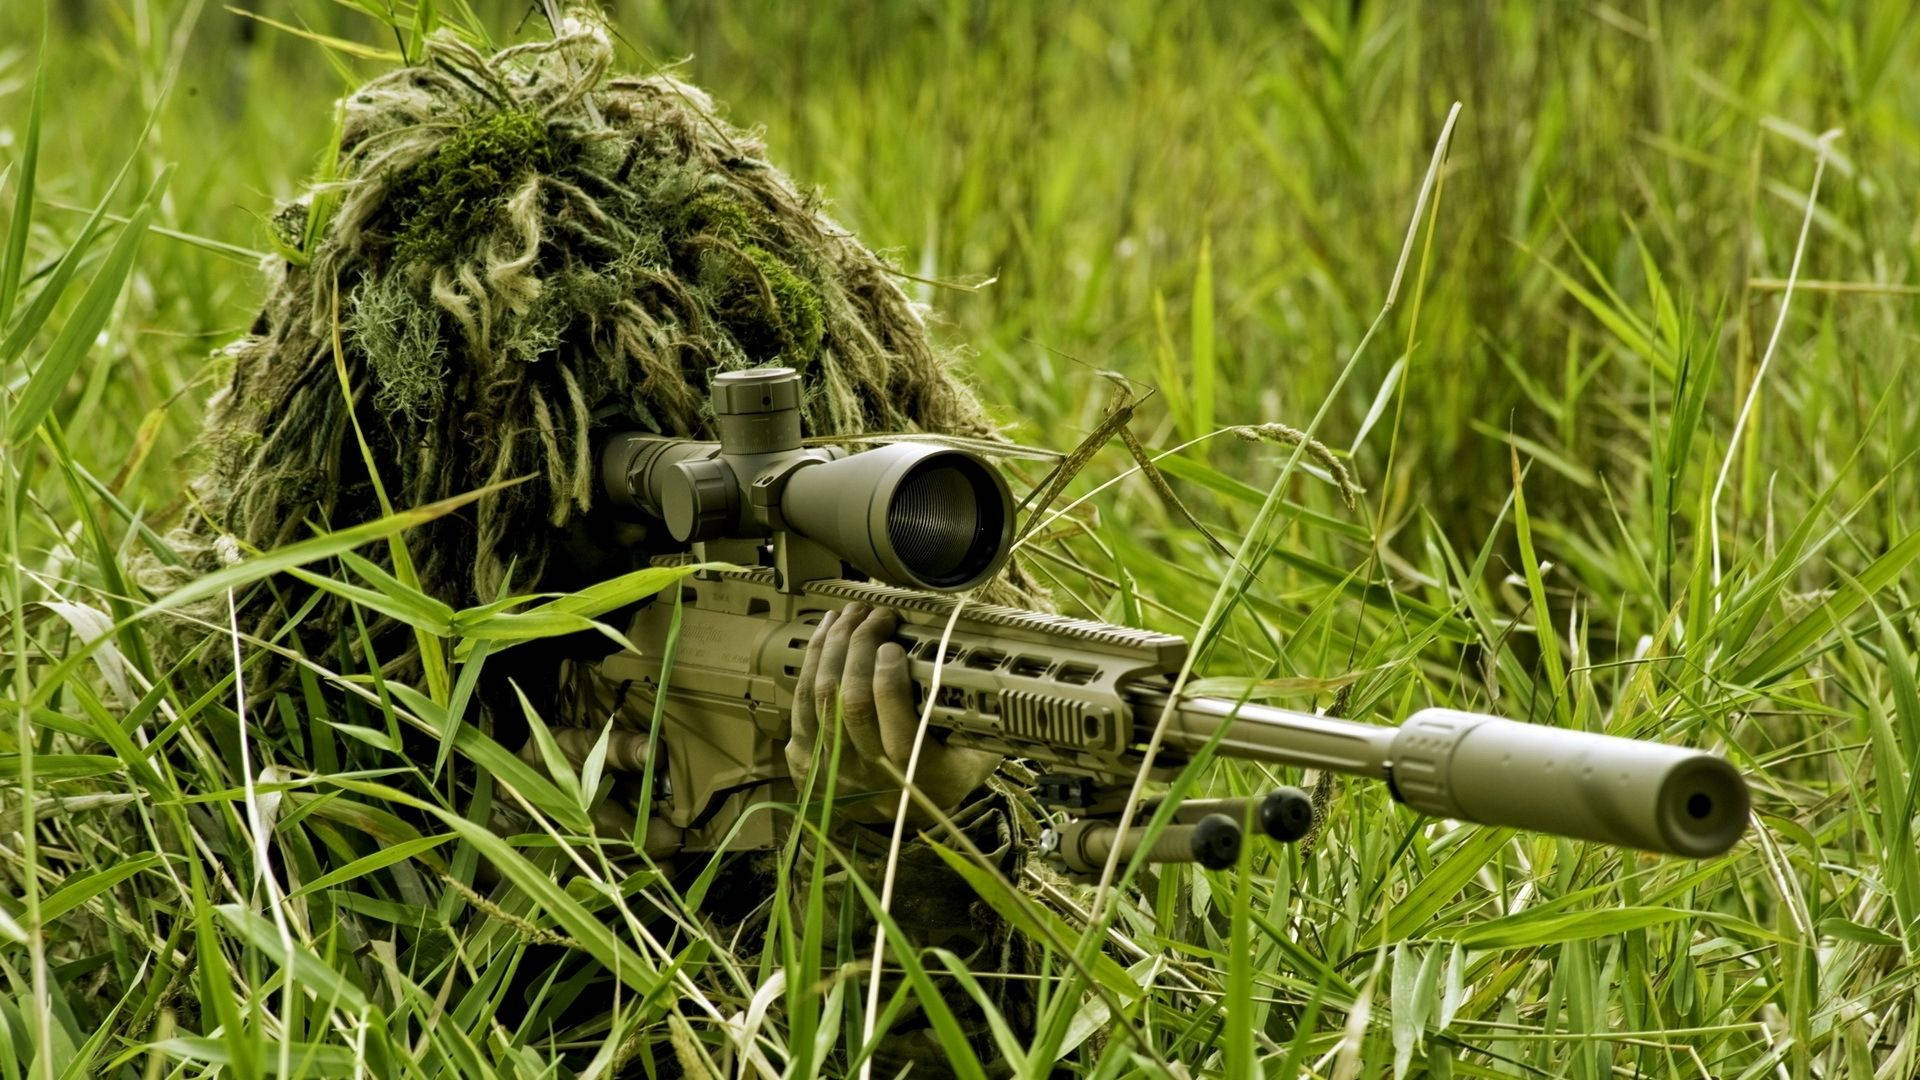 Sniper In Grass Camouflage Wallpaper